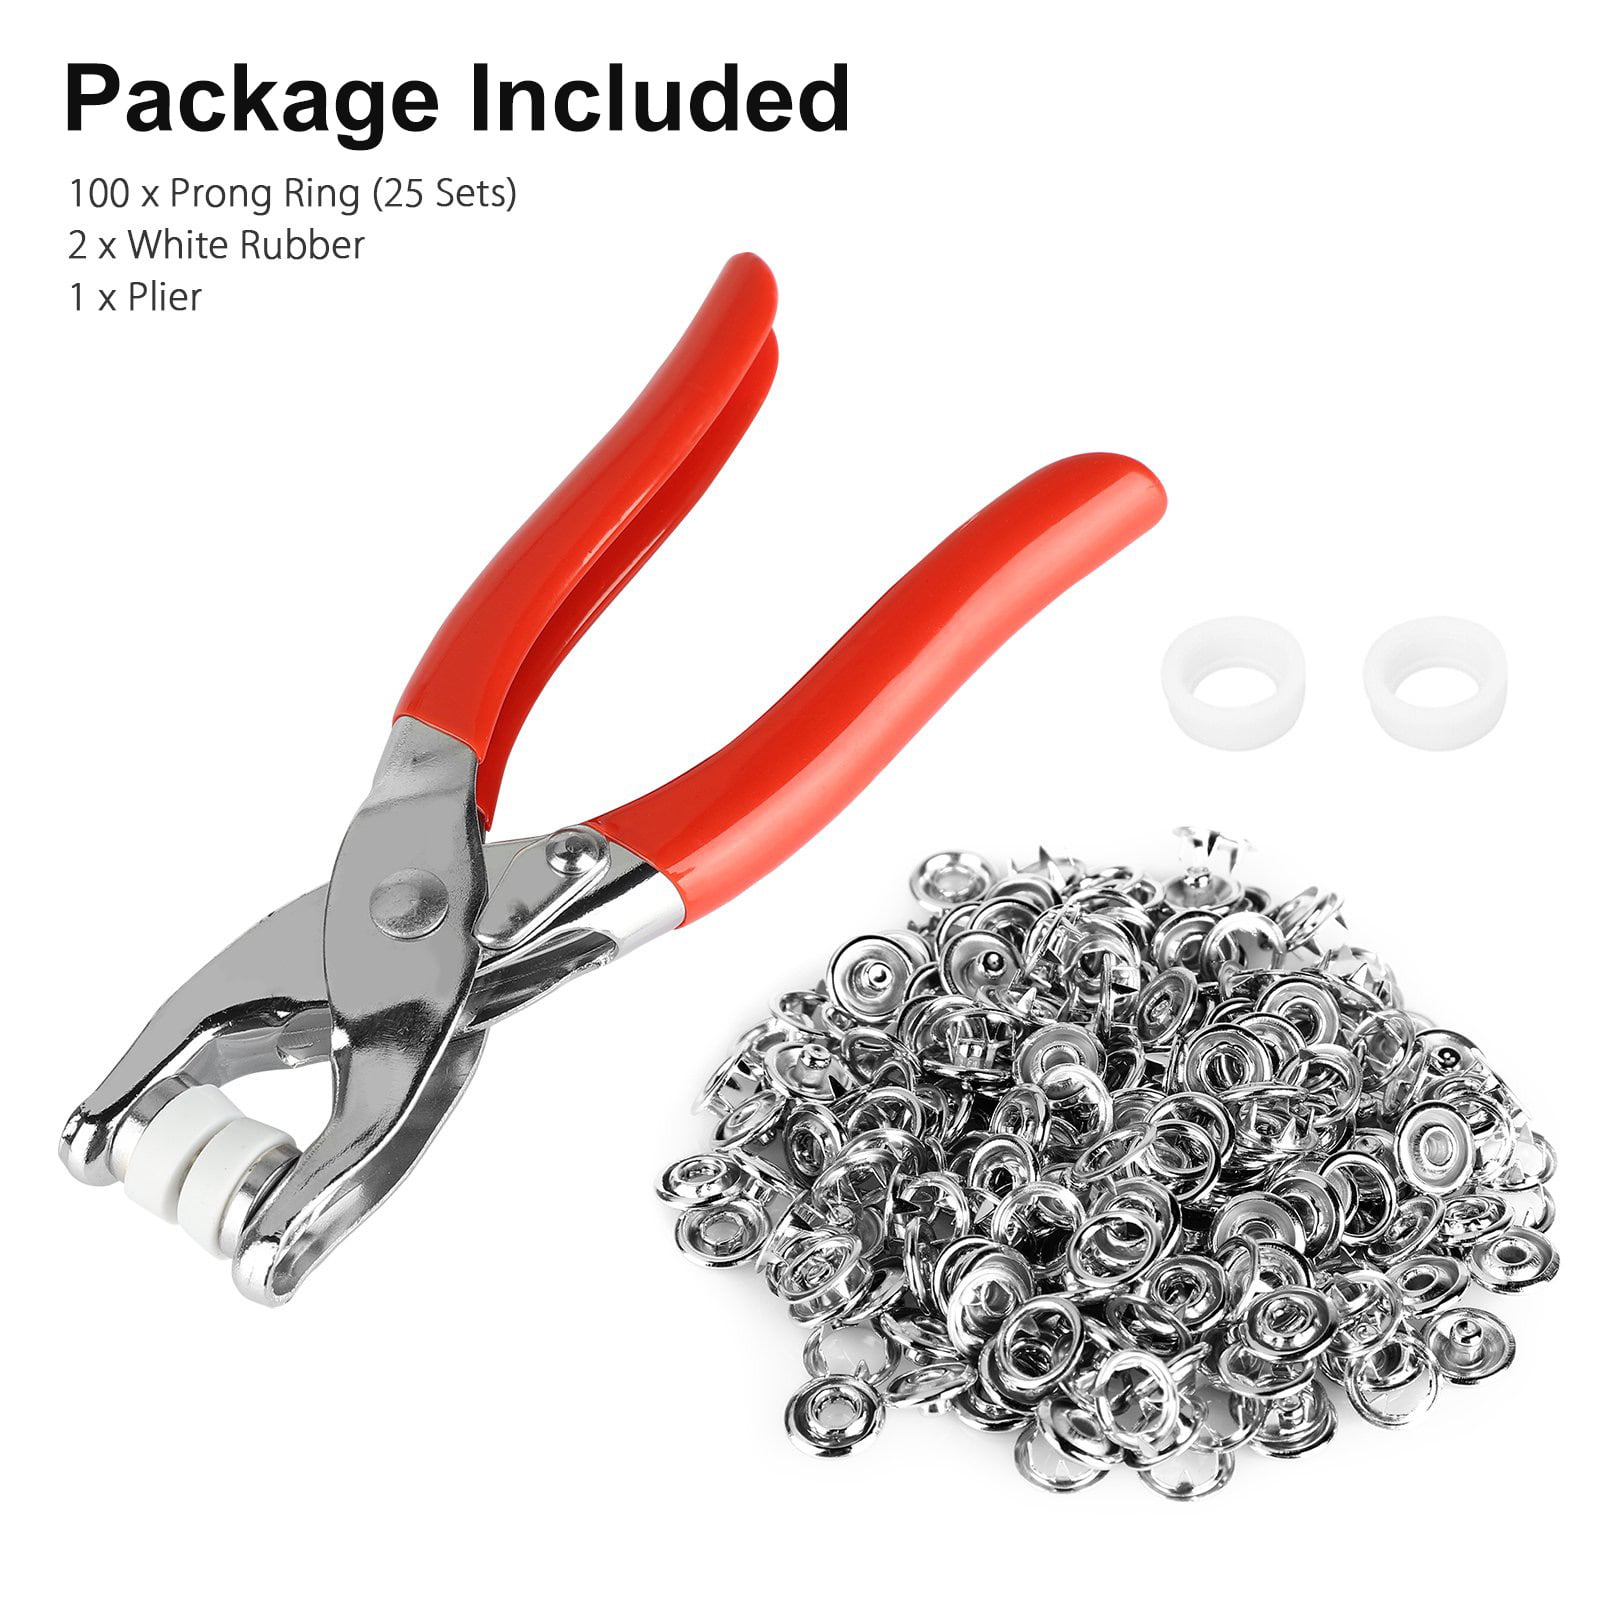 Snap Factory Easy Press Button Snap Fastener Pliers With 108 Snap Pieces -  3/16